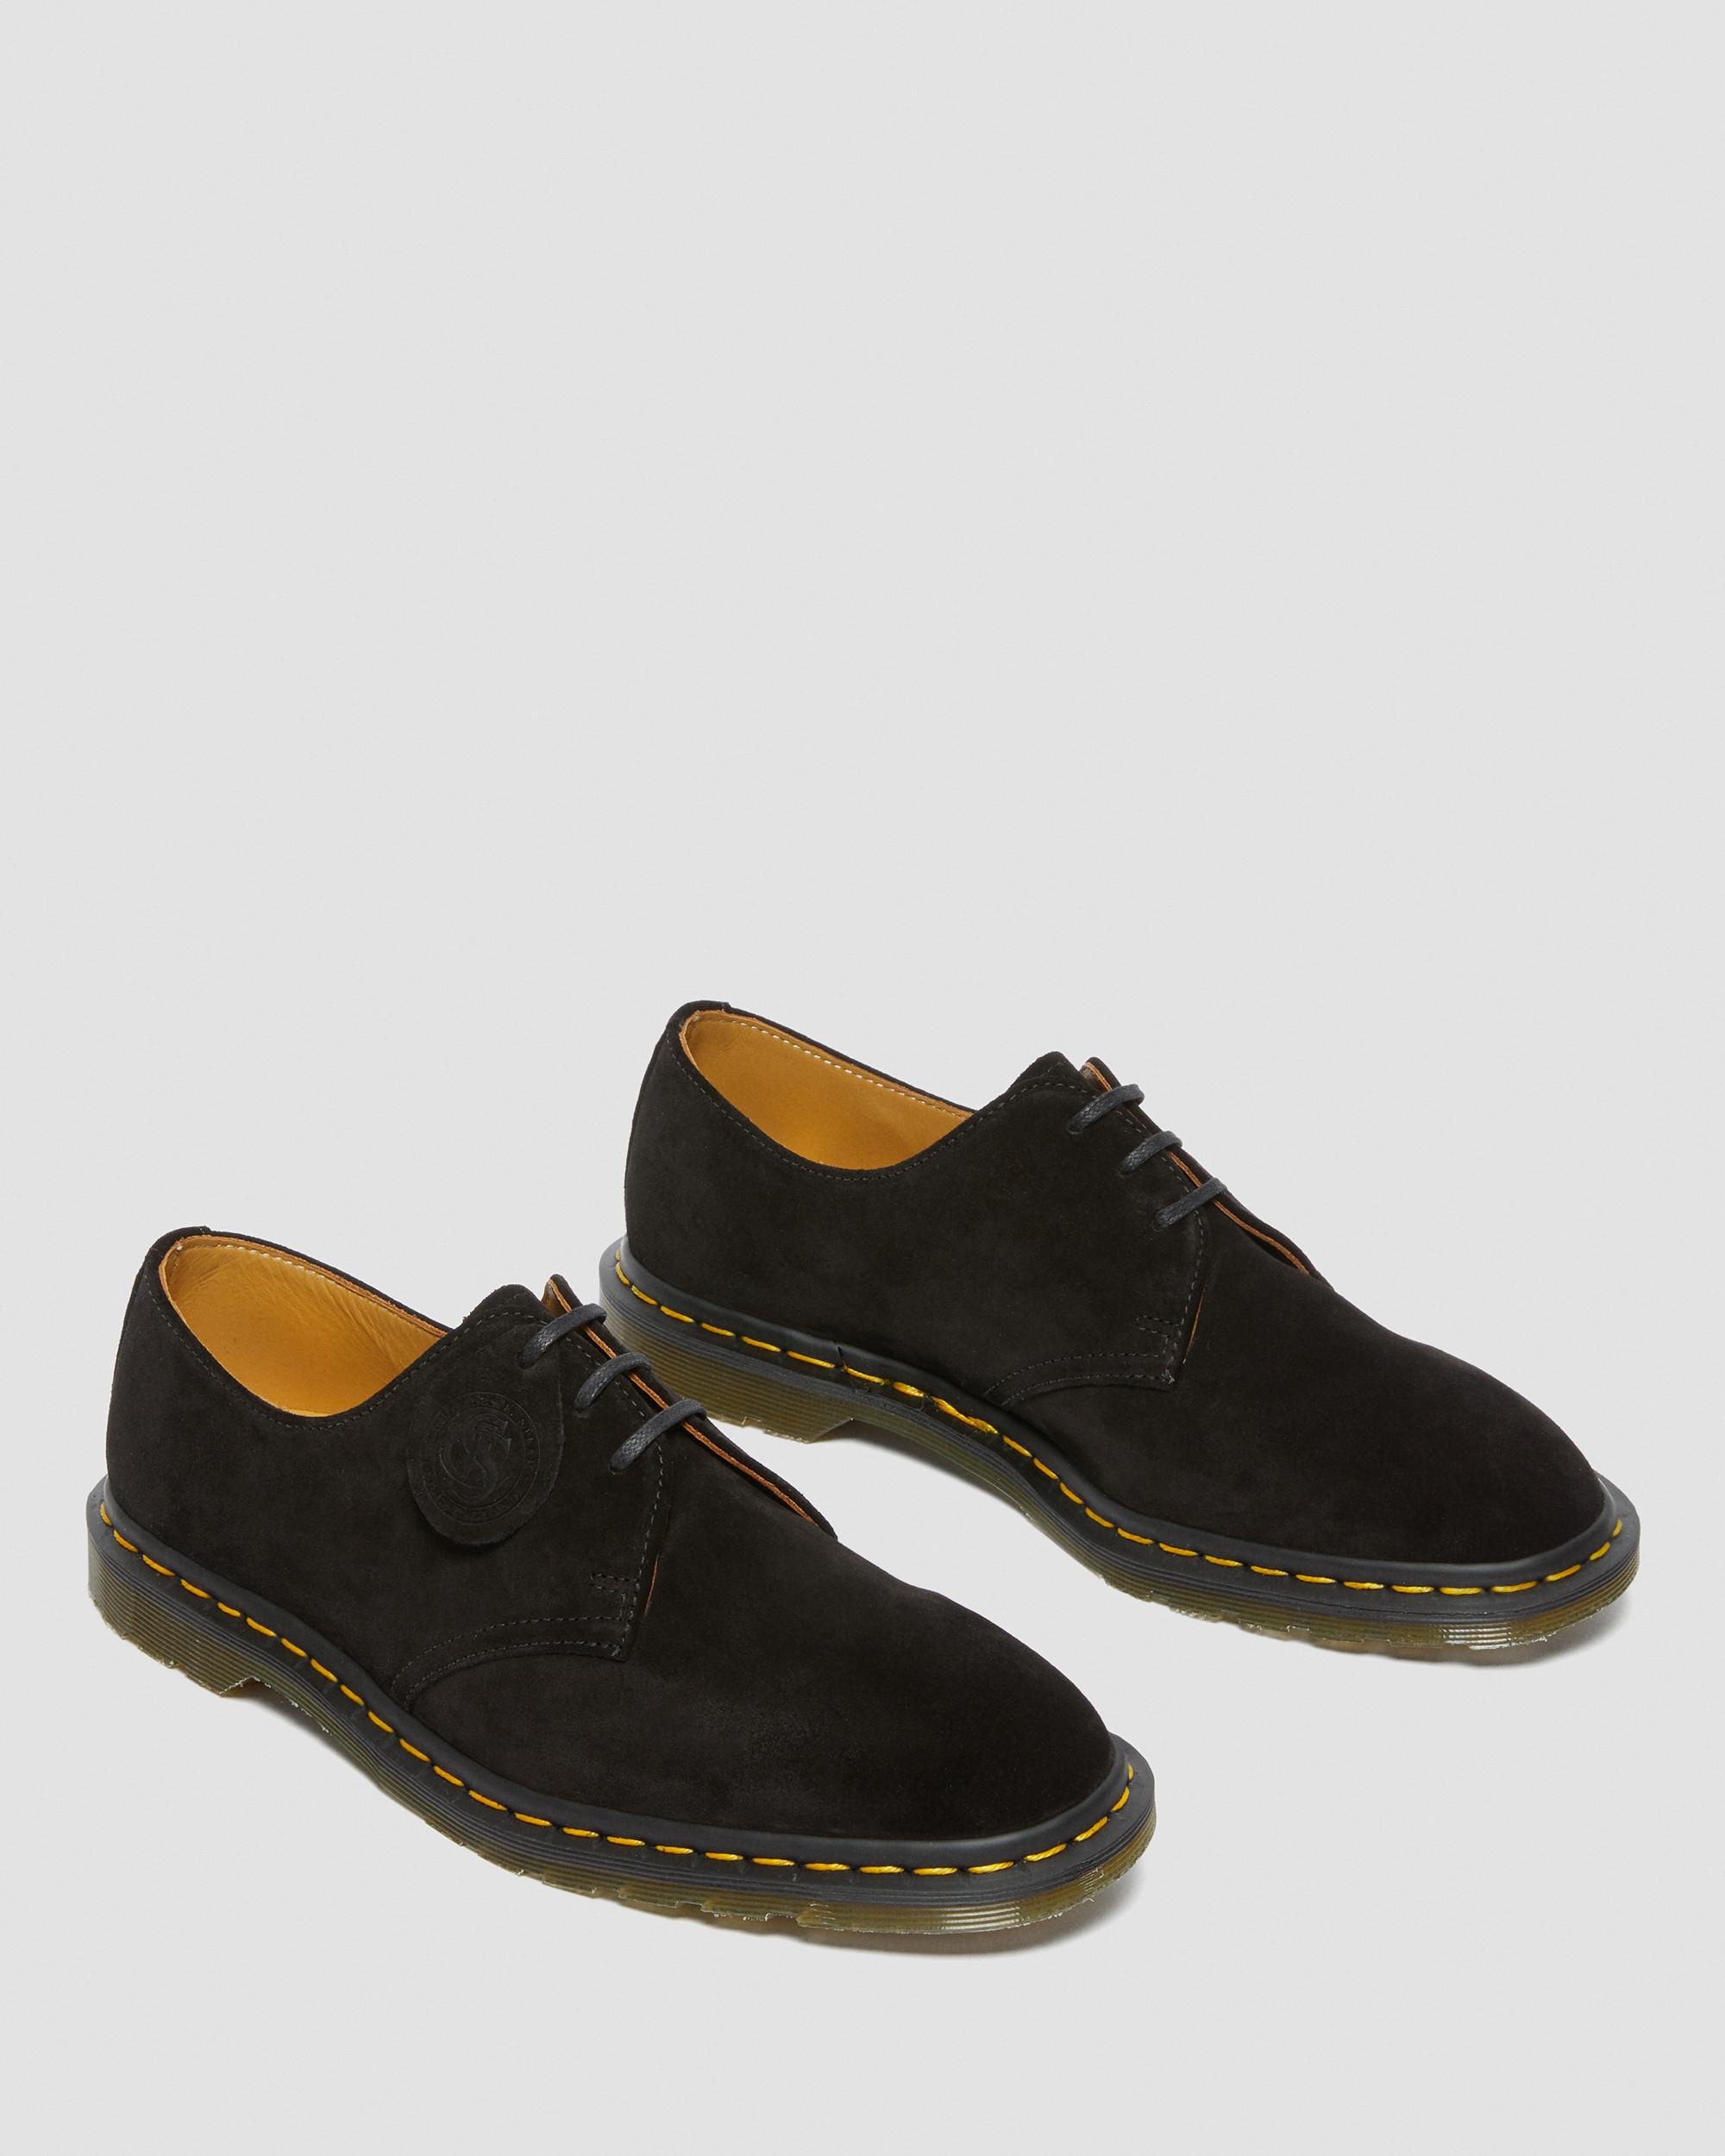 DR MARTENS Archie II Made in England Suede Oxford Shoes